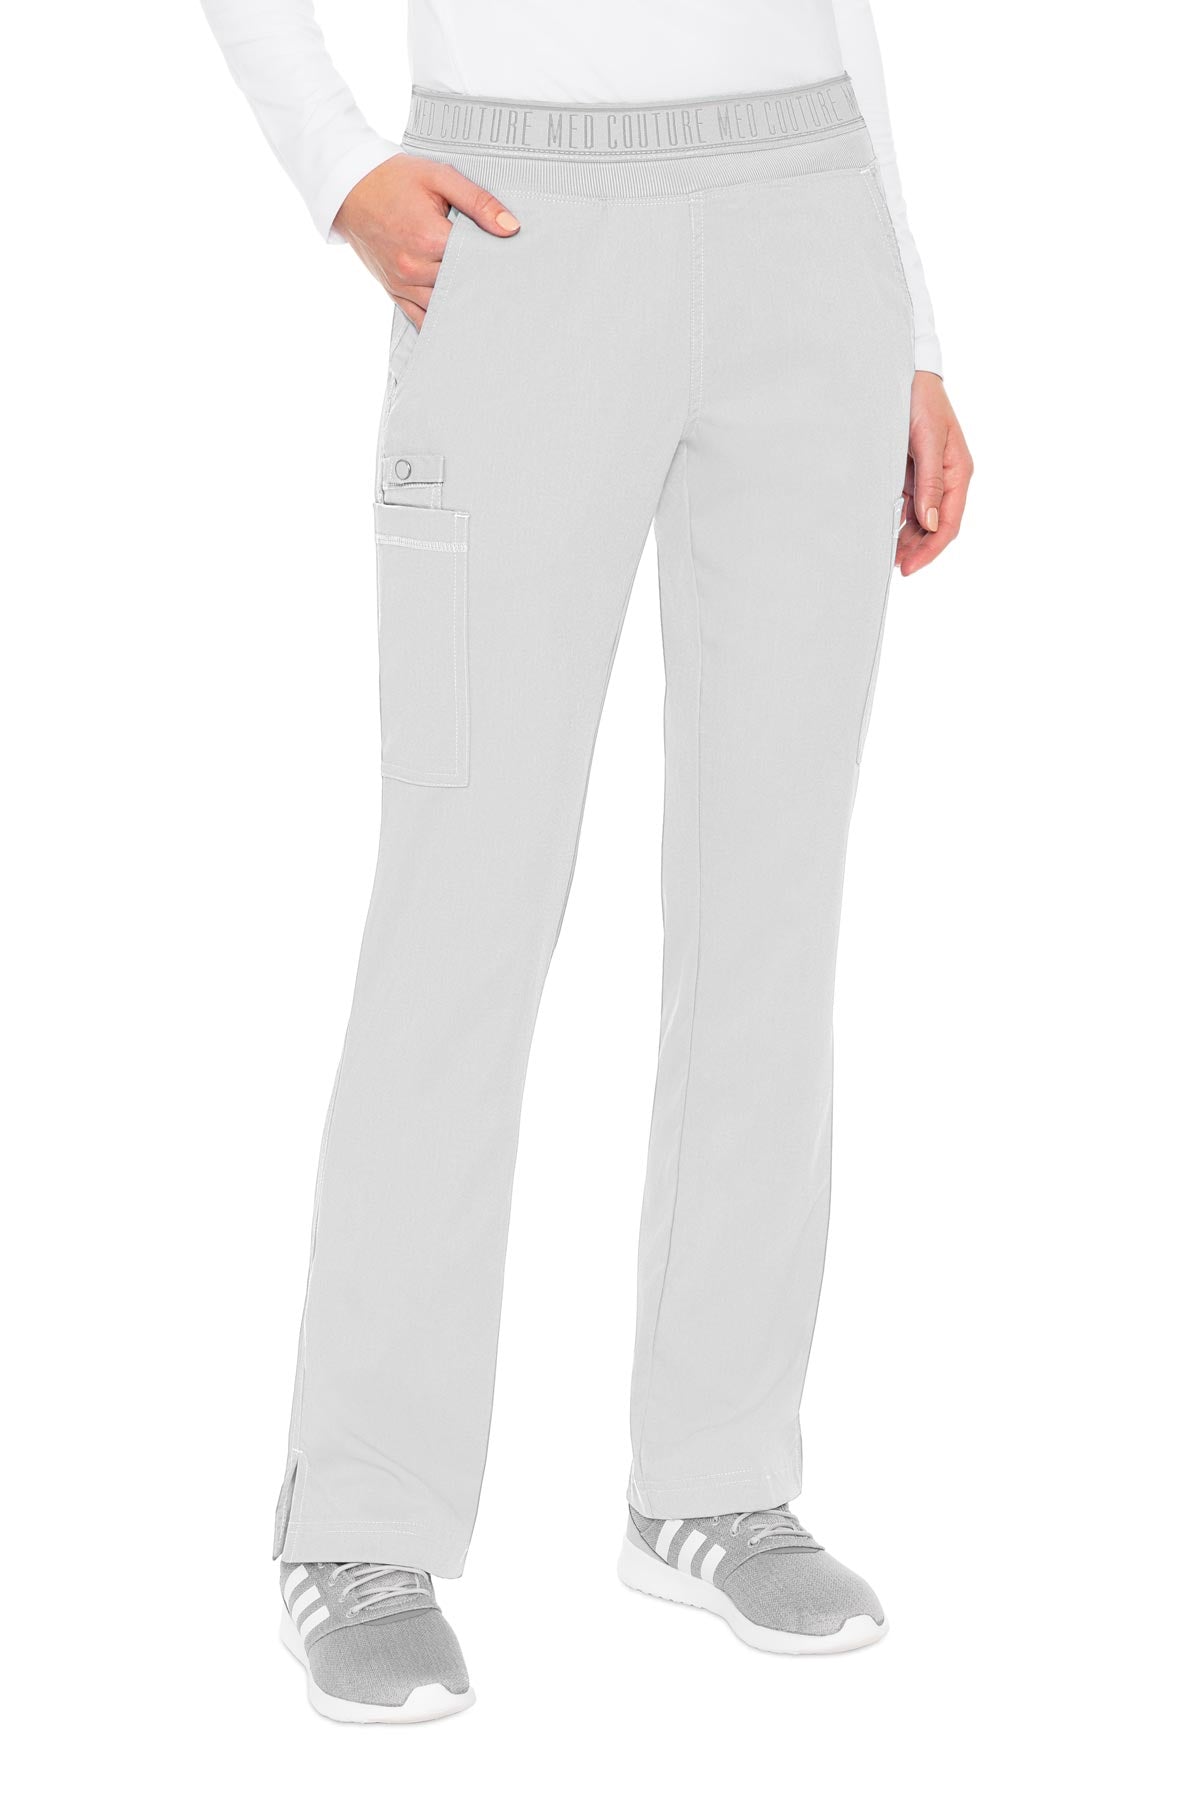 MED COUTURE Yoga 2 Cargo Pocket Pant